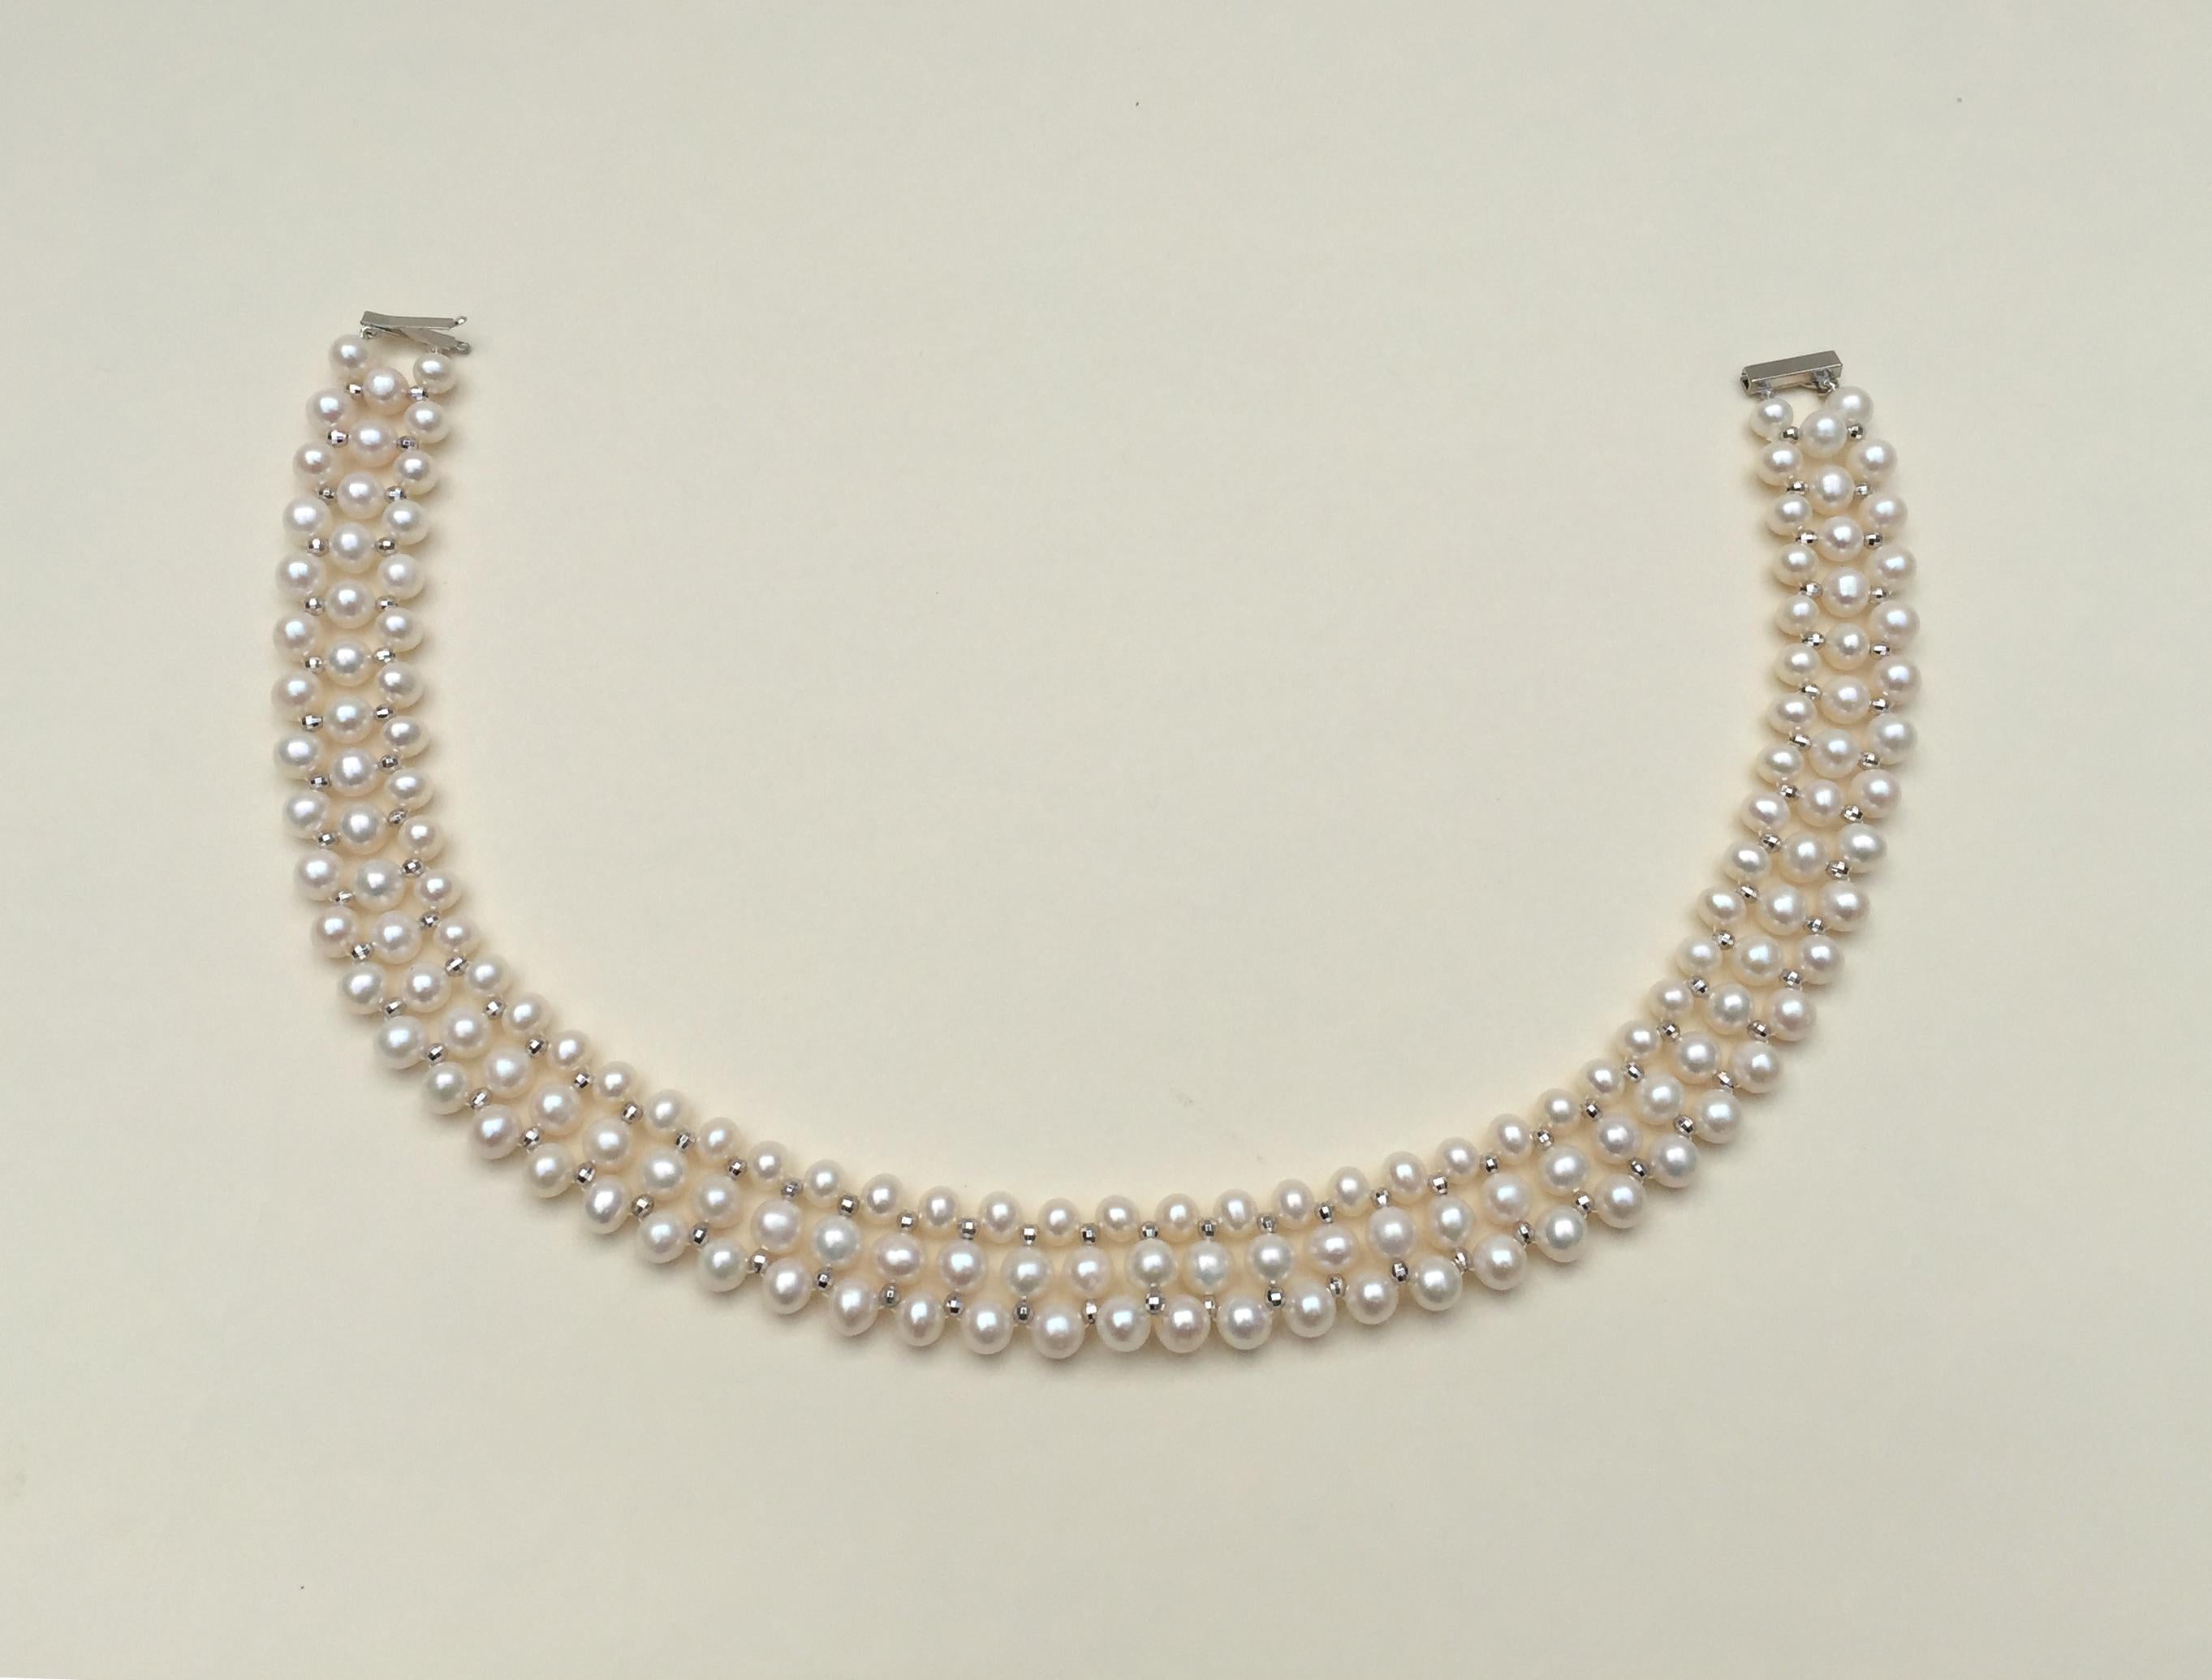 Marina J Woven Pearl Necklace with 14 K White Gold Faceted Beads and Clasp In New Condition For Sale In Los Angeles, CA